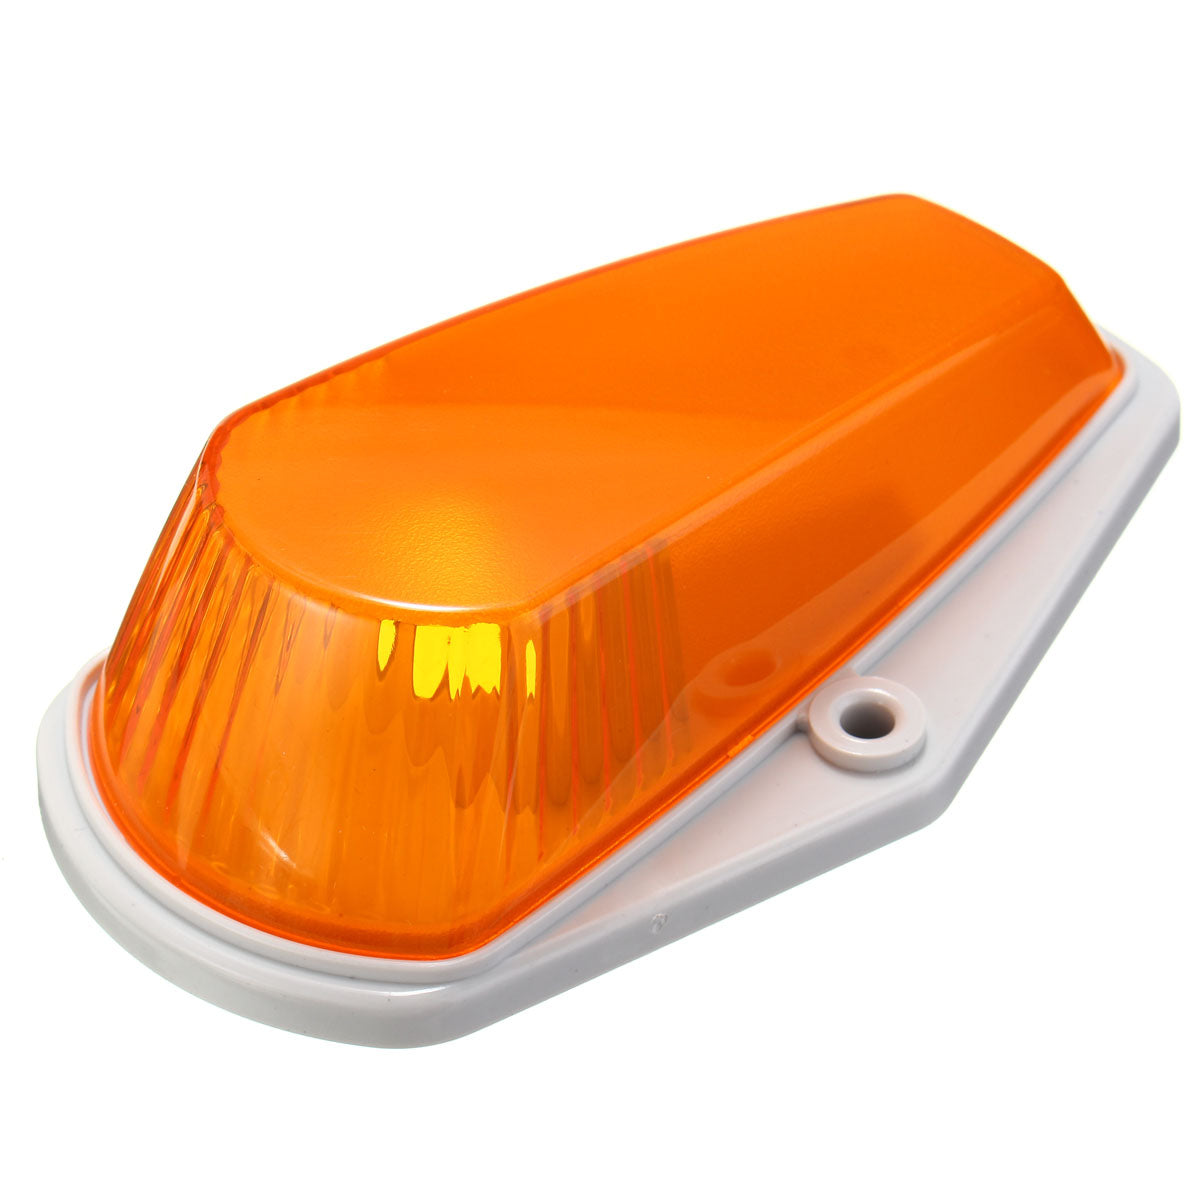 Dark Orange 5pcs Roof Light Housing with T10 Marker Clearance Lamp Amber for Ford Pickup